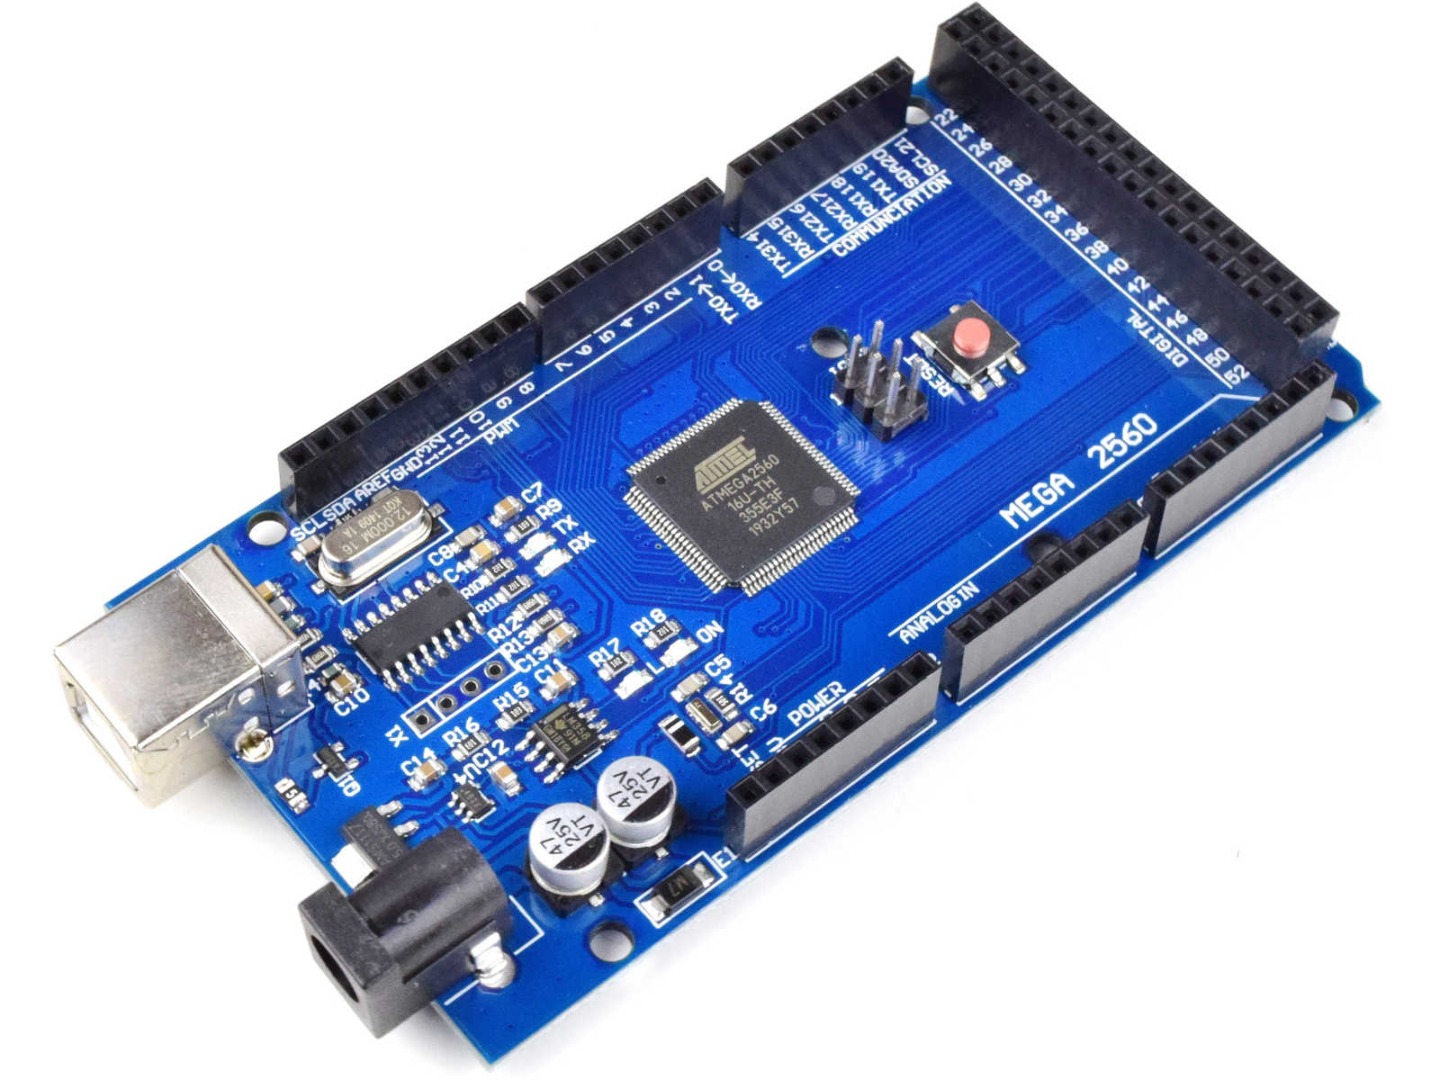 MEGA 2560 R3 module with Atmega2560 + CH340 USB (100% compatible with Arduino) 8